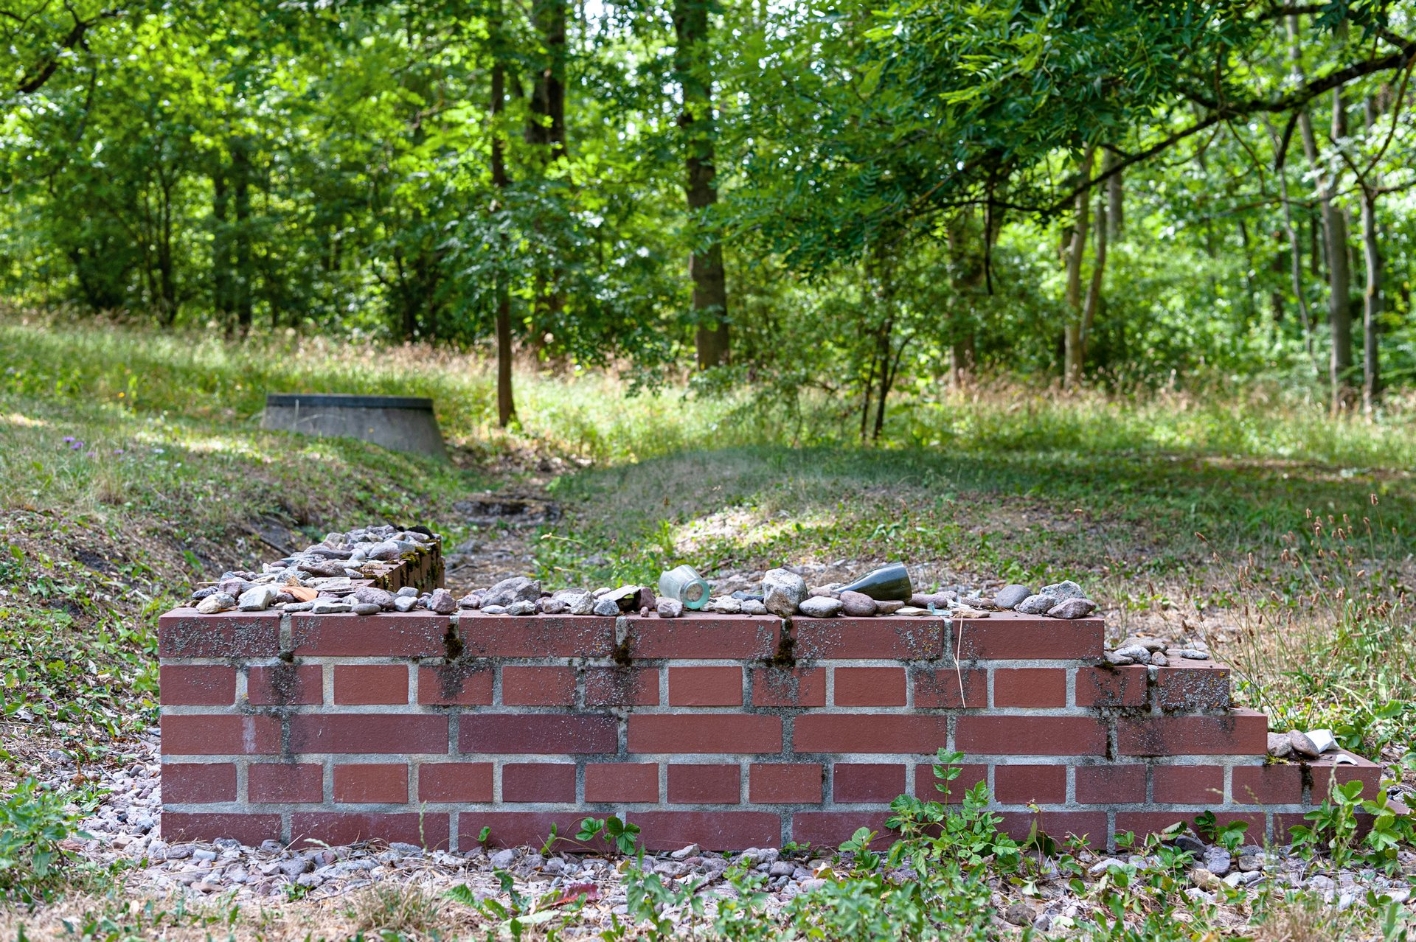 A small, L-shaped brick wall remnant. On the low remains of the wall are deposited individual finds such as stones or parts of bottles.